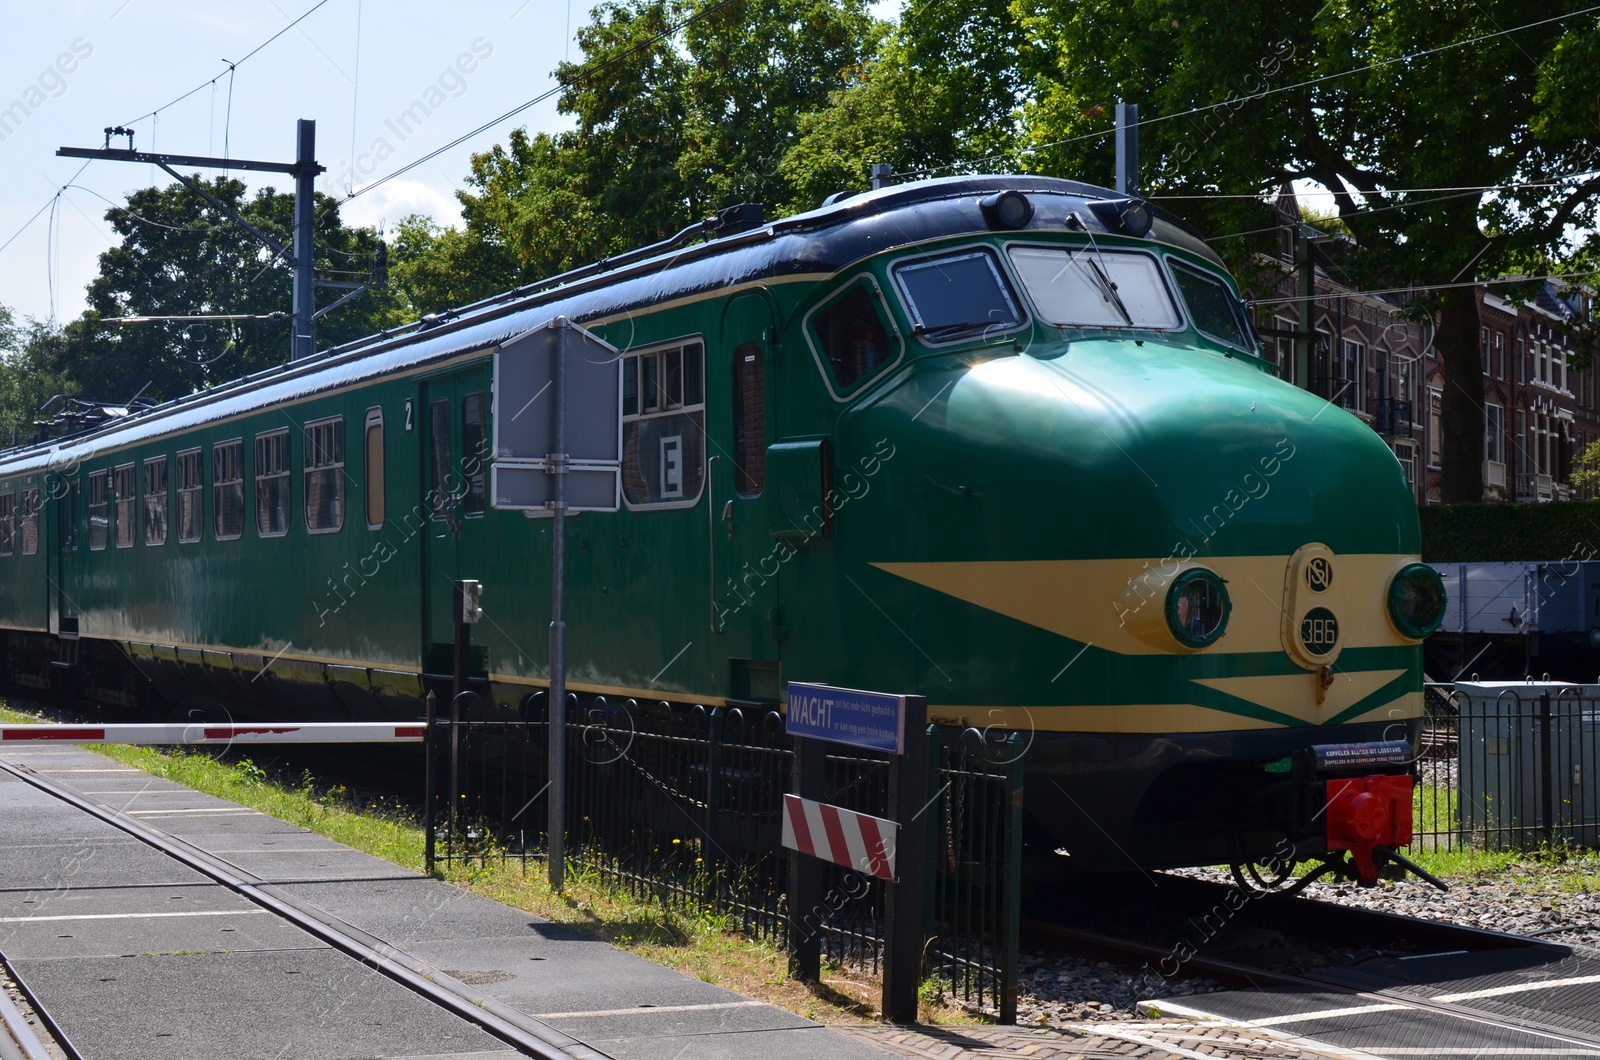 Photo of Utrecht, Netherlands - July 23, 2022: Electric train on display at Spoorwegmuseum